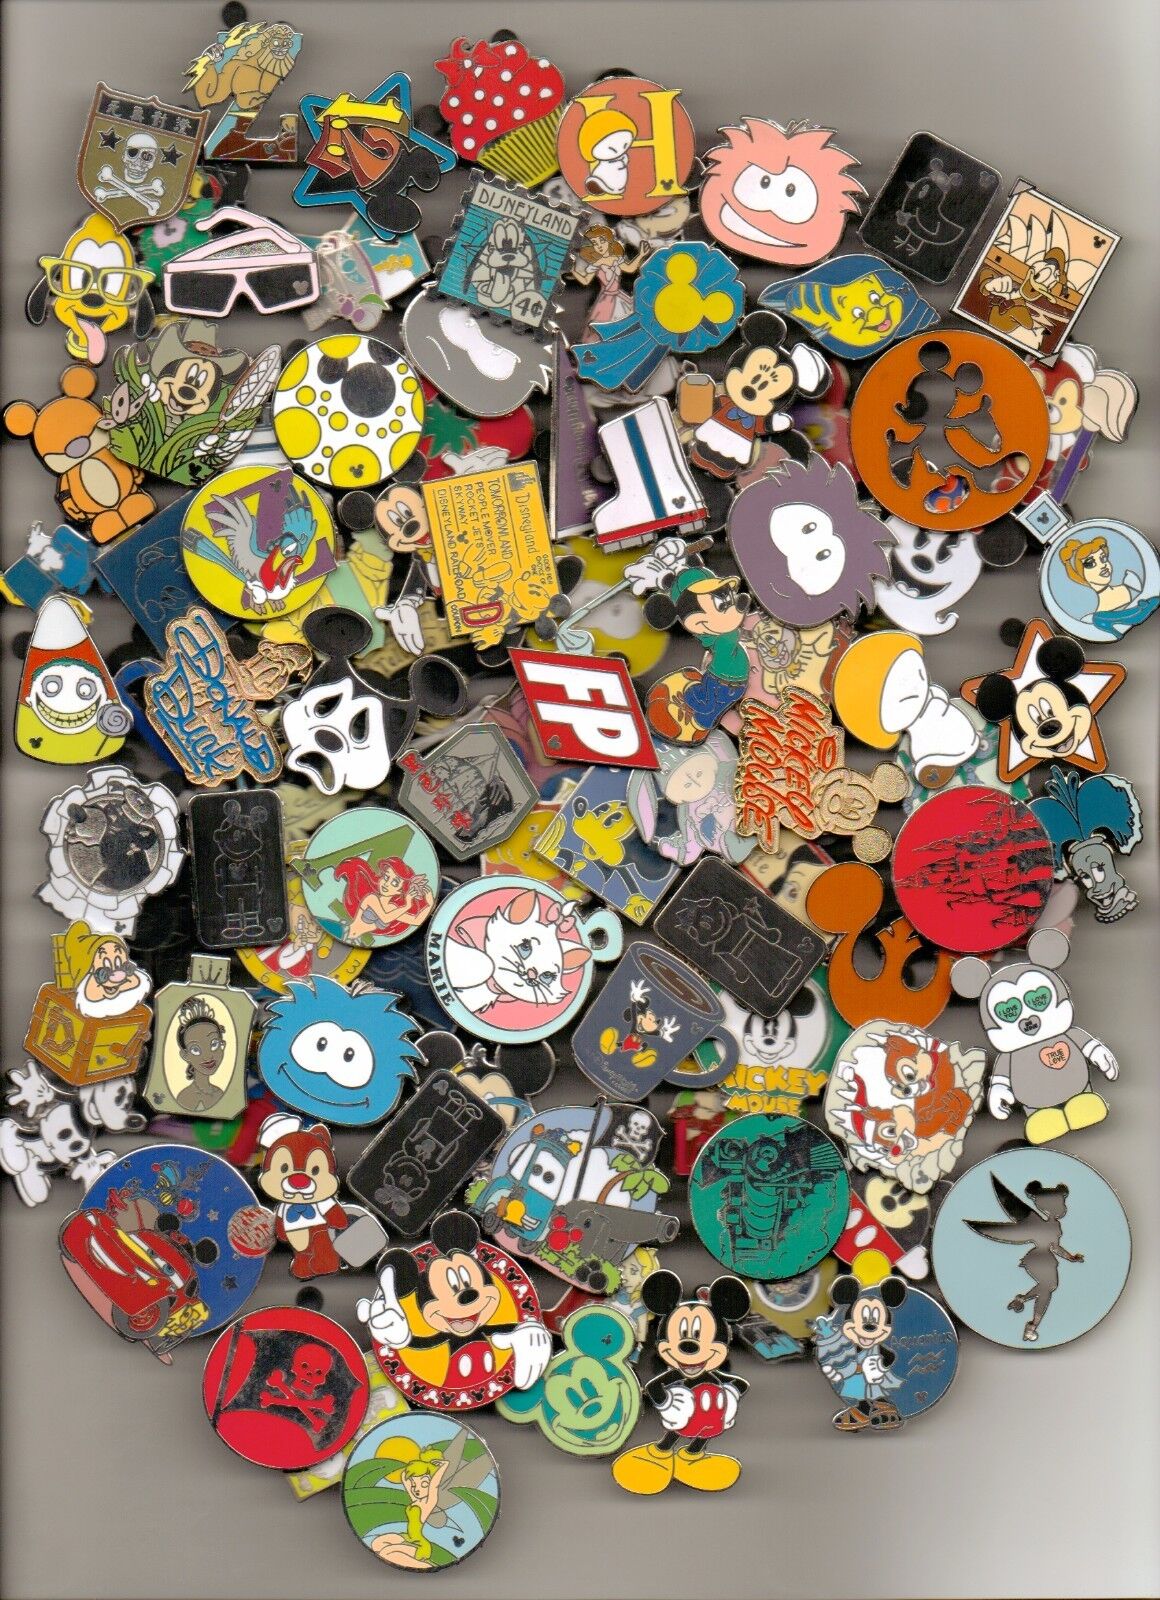 DISNEY PINS 100 DIFFERENT PINS MIXED LOT SELF PROCLAIMED FASTEST SHIPPER IN USA